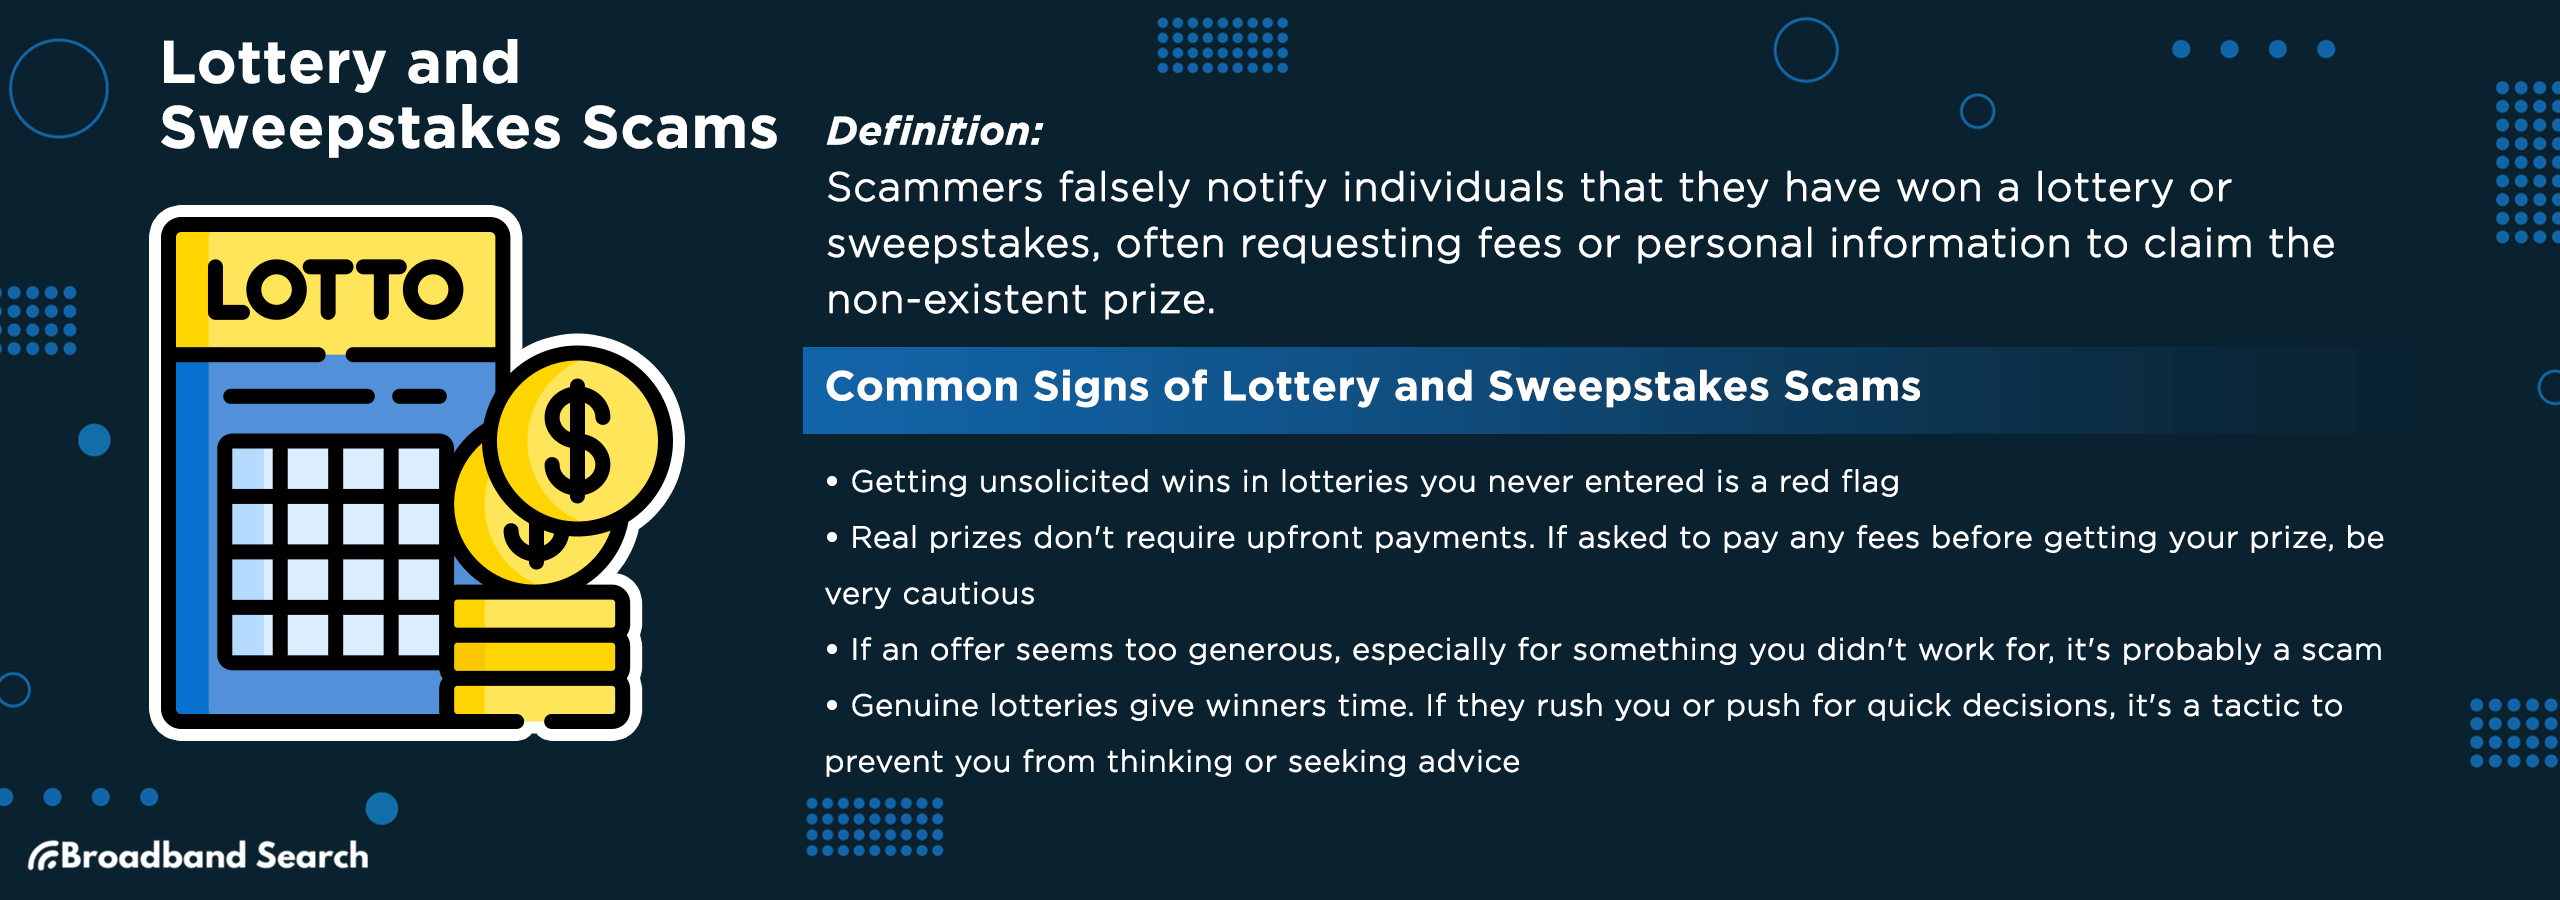 Definition and signs of lottery and sweepstakes scams